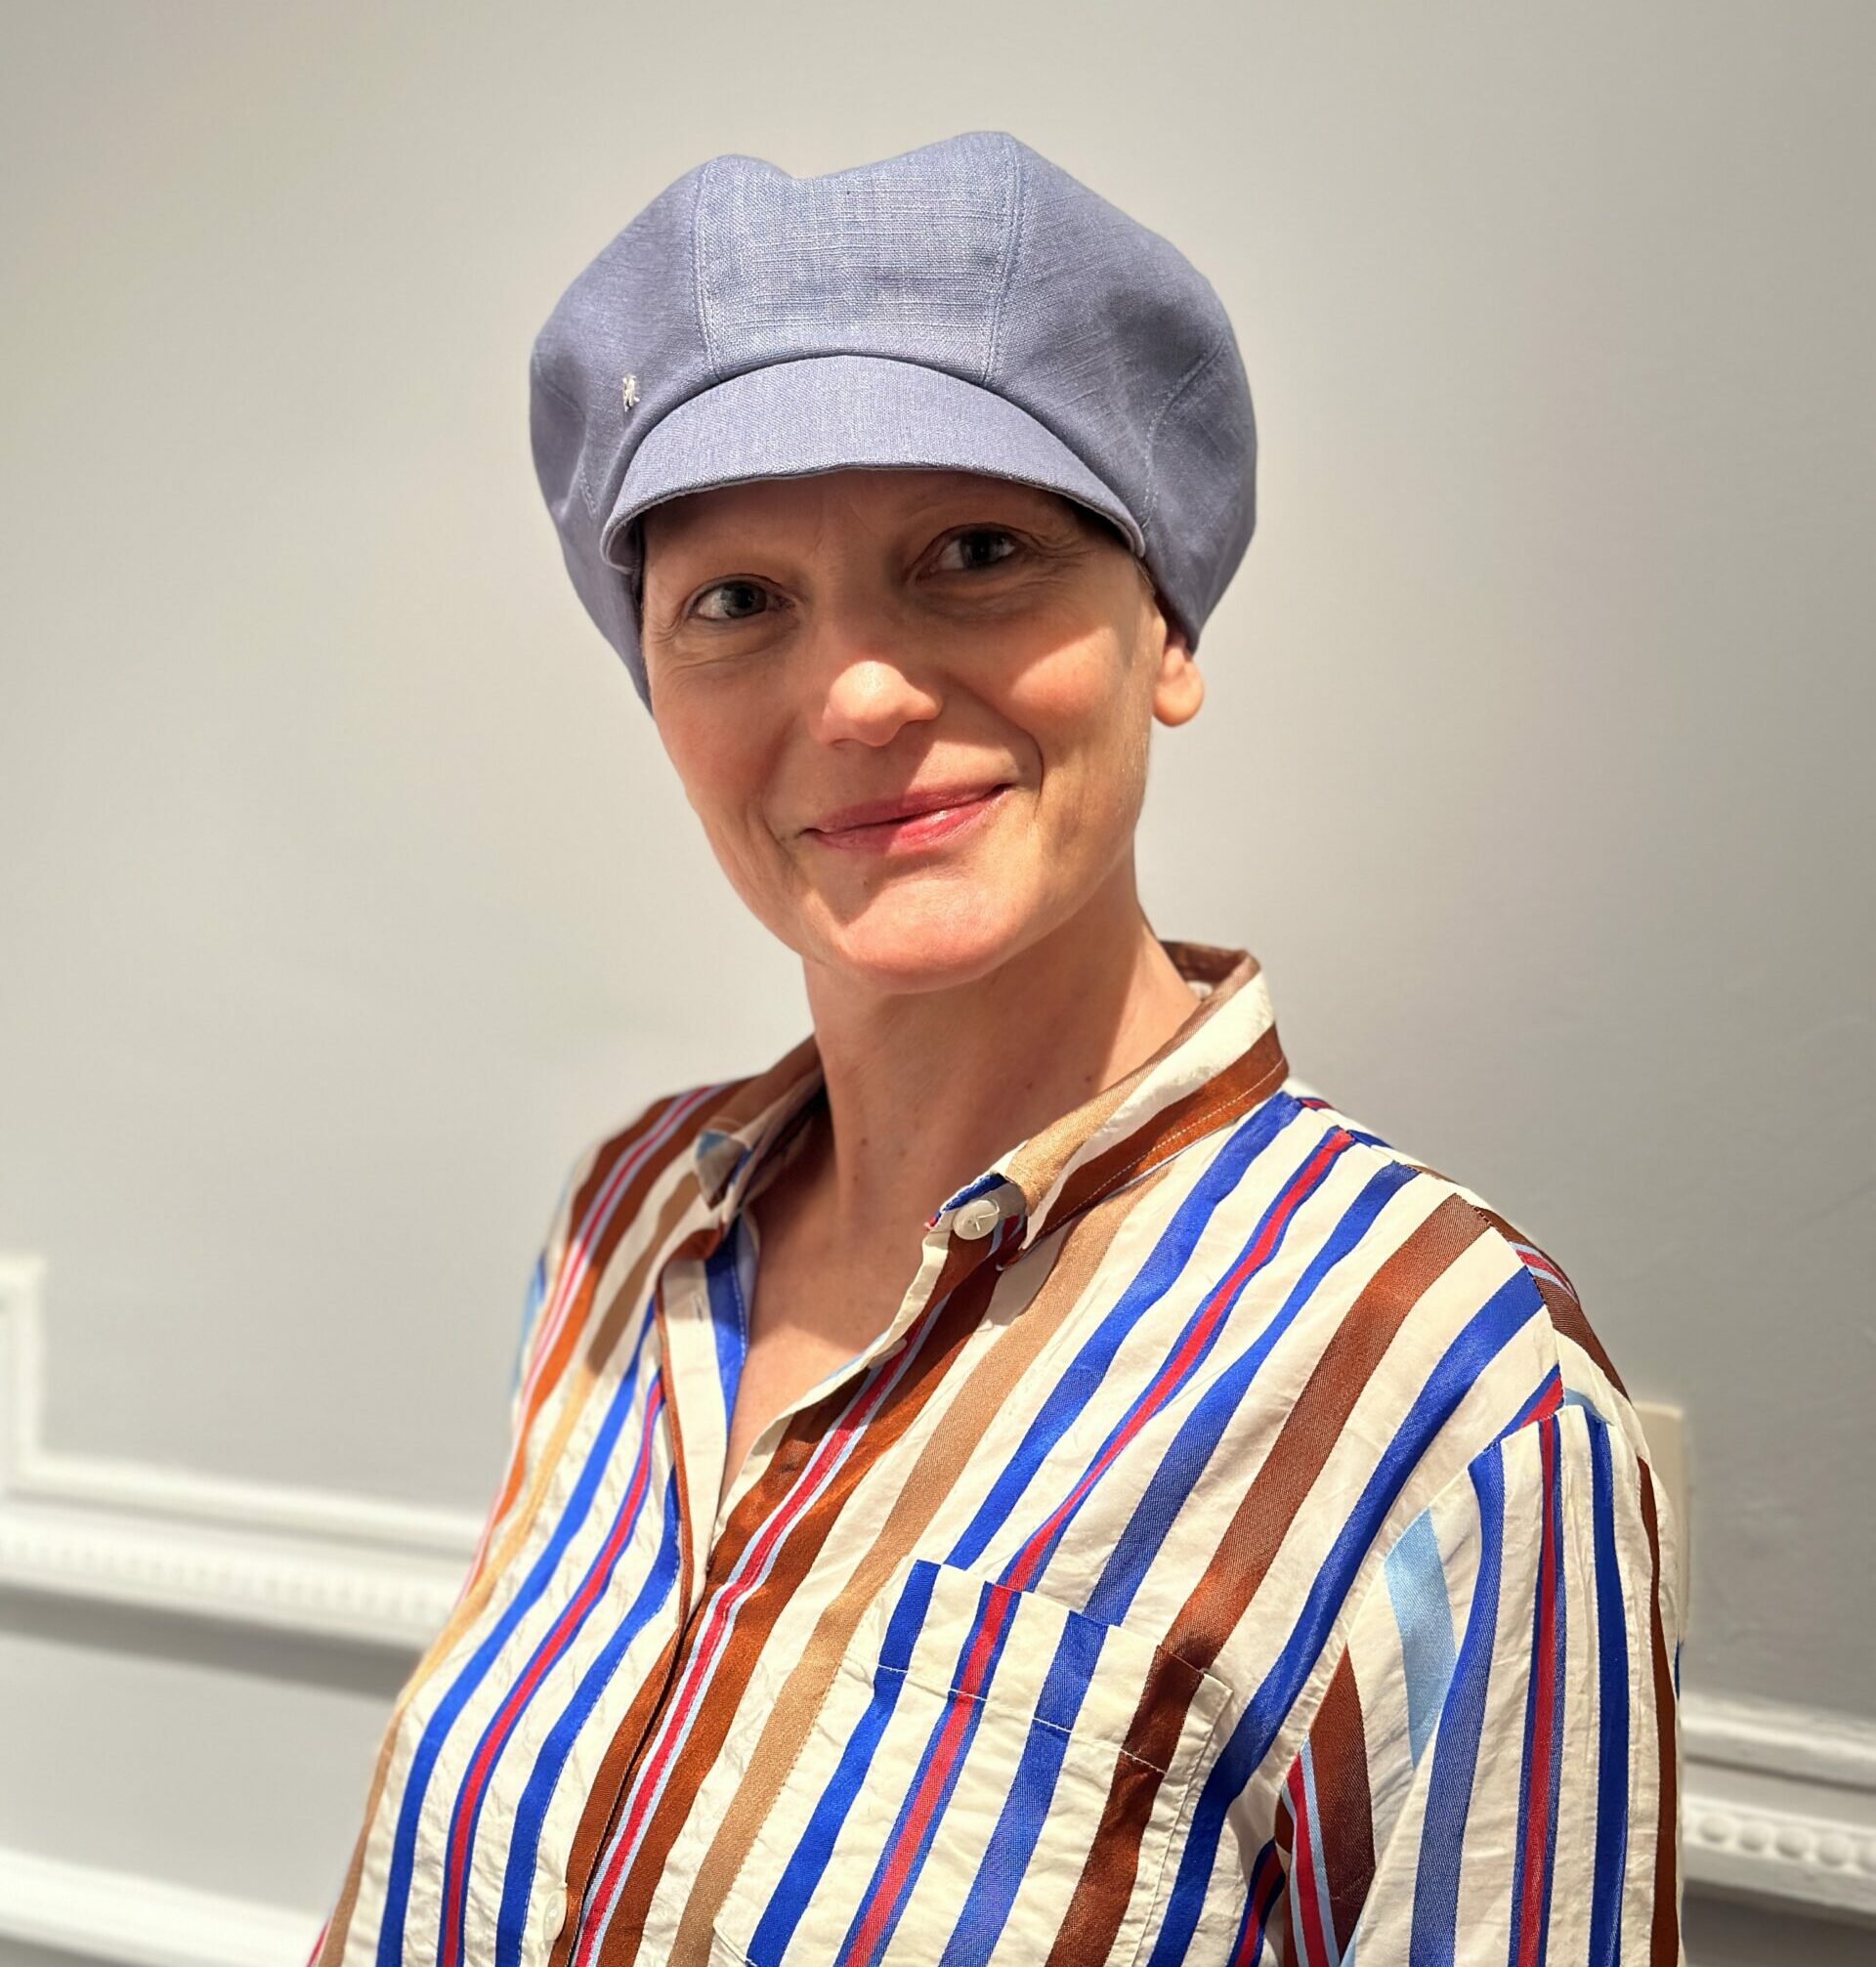 Testimonial of Julie about her cancer - Caring Hat